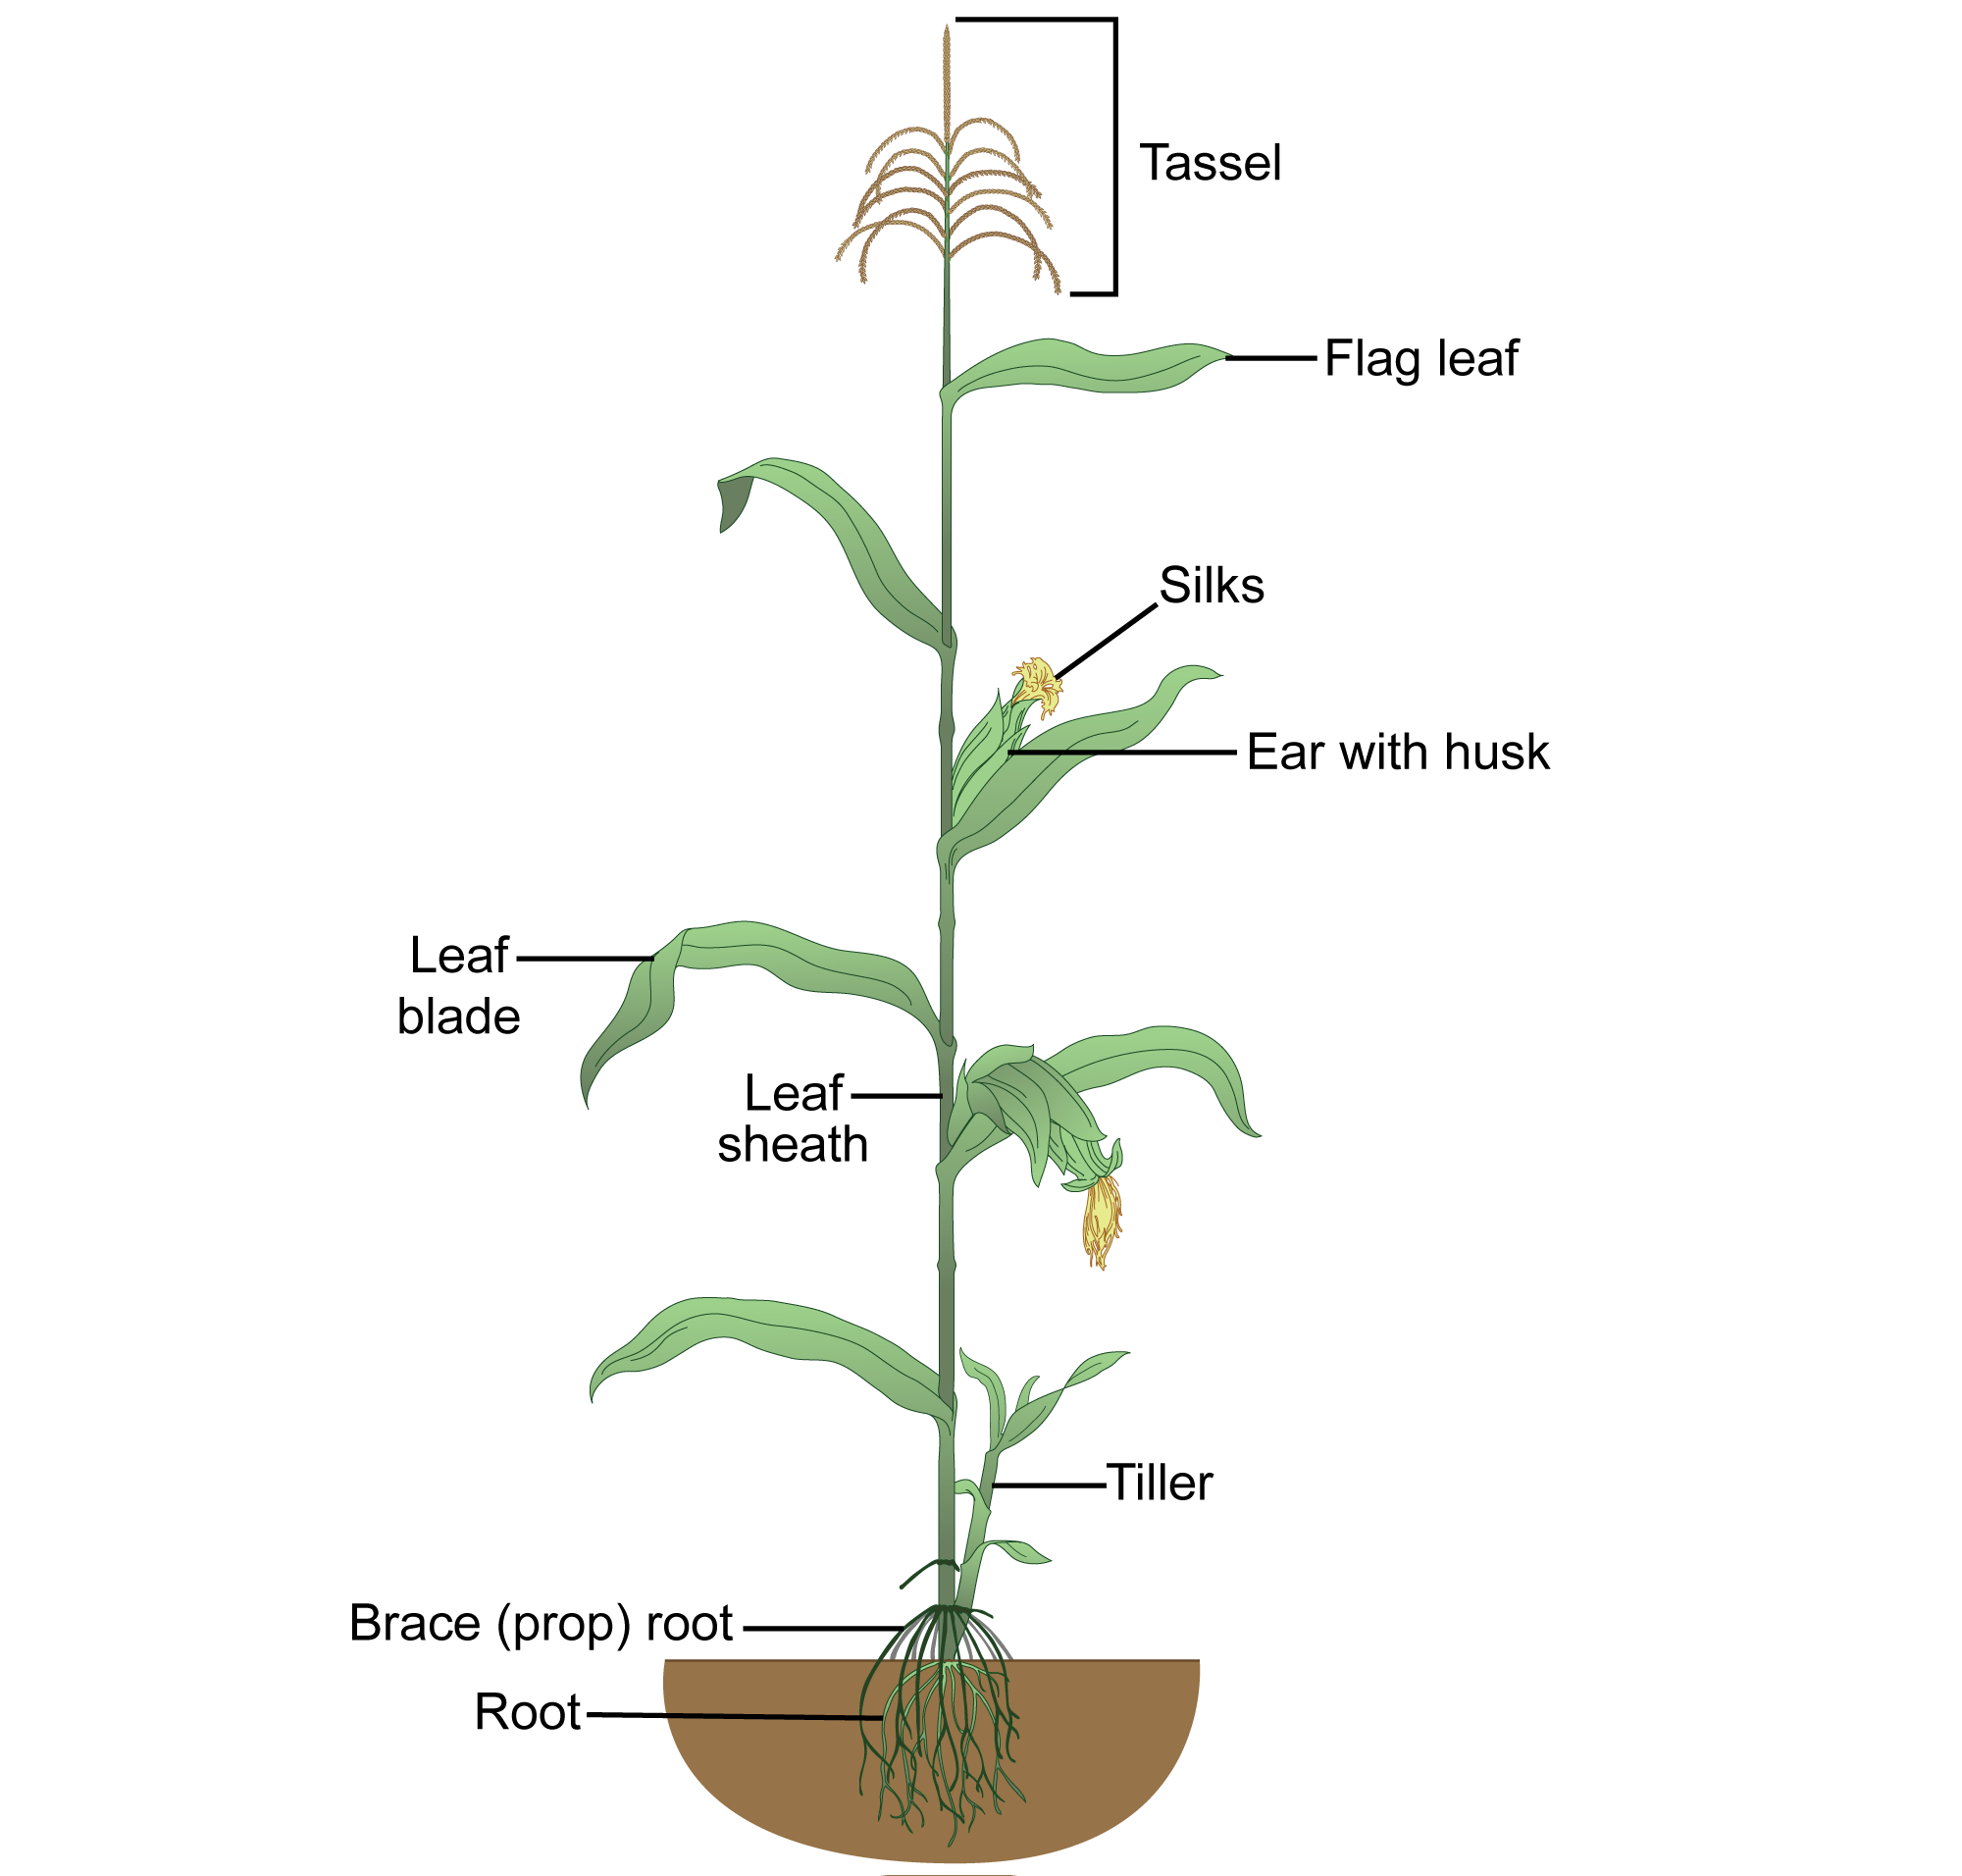 Diagram of a mature maize plant with reproductive structures. The diagram shows a maize plant with a tall, straight stalk with six foliage leaves. A tassel occurs at the top of the stalk, and ears with silks protruding from them occur in two of the leaf axils. A series of prop roots and underground roots occur at the base of the stalk. A tiller also occurs near the base of the stalk.